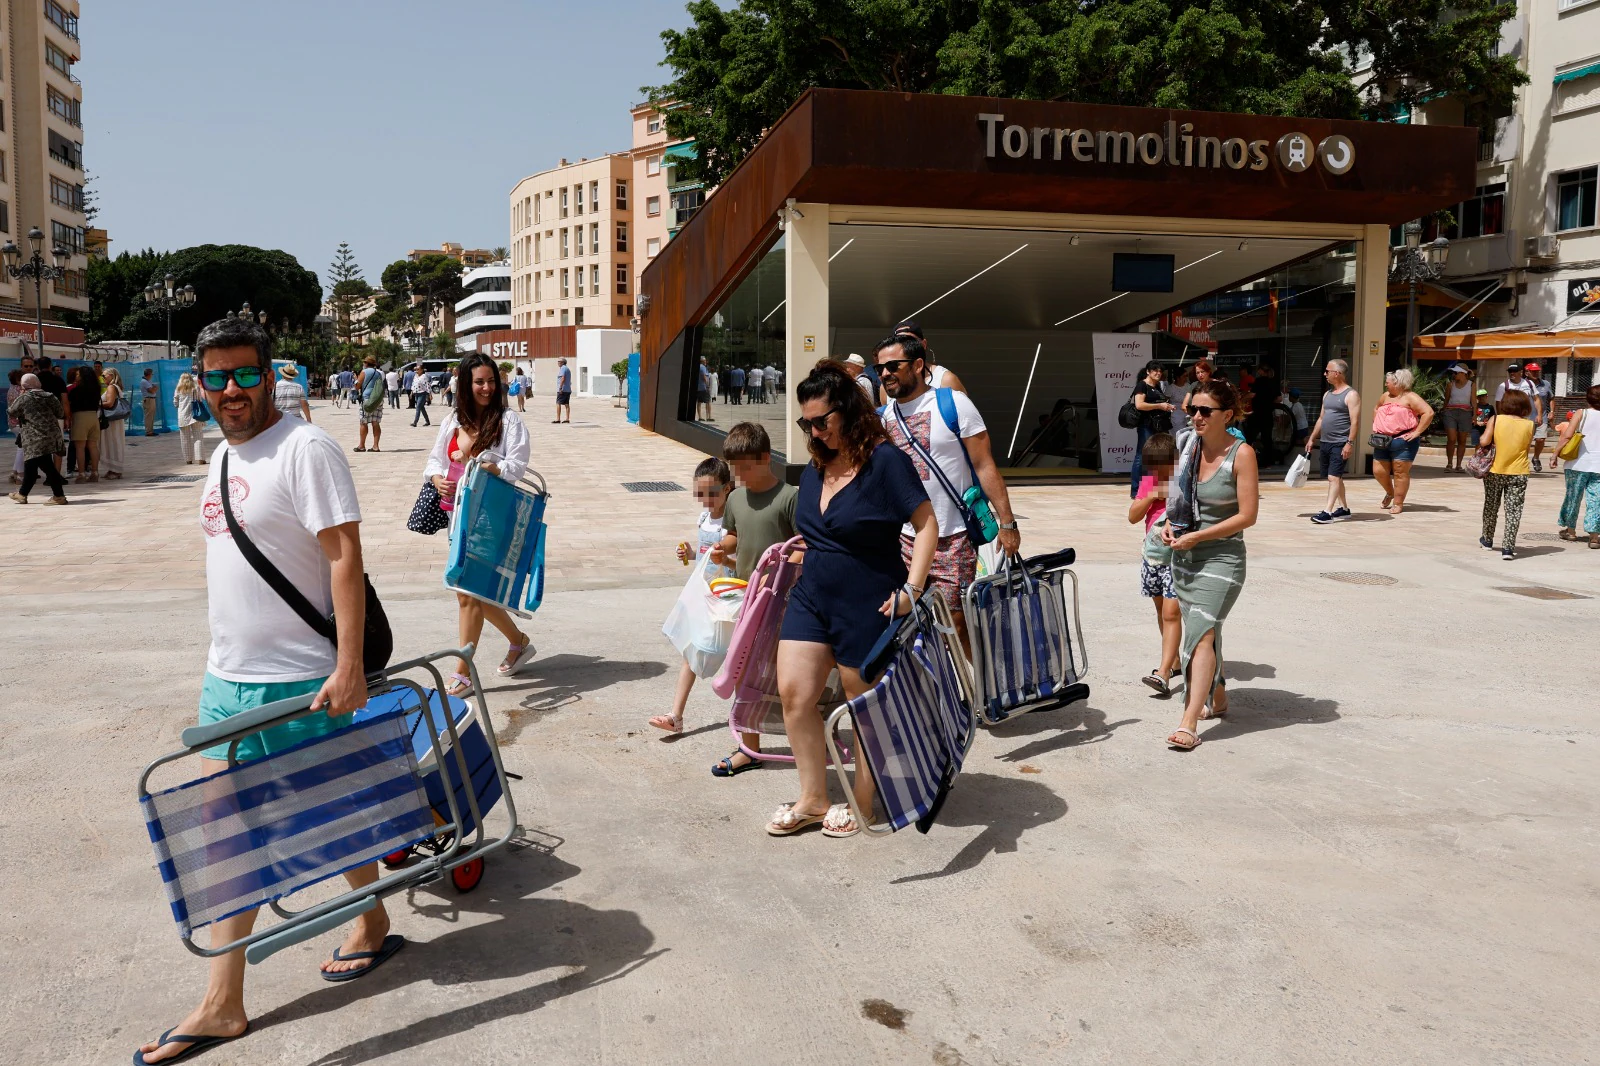 Passengers using the new Cercanías station in the centre of Torremolinos.